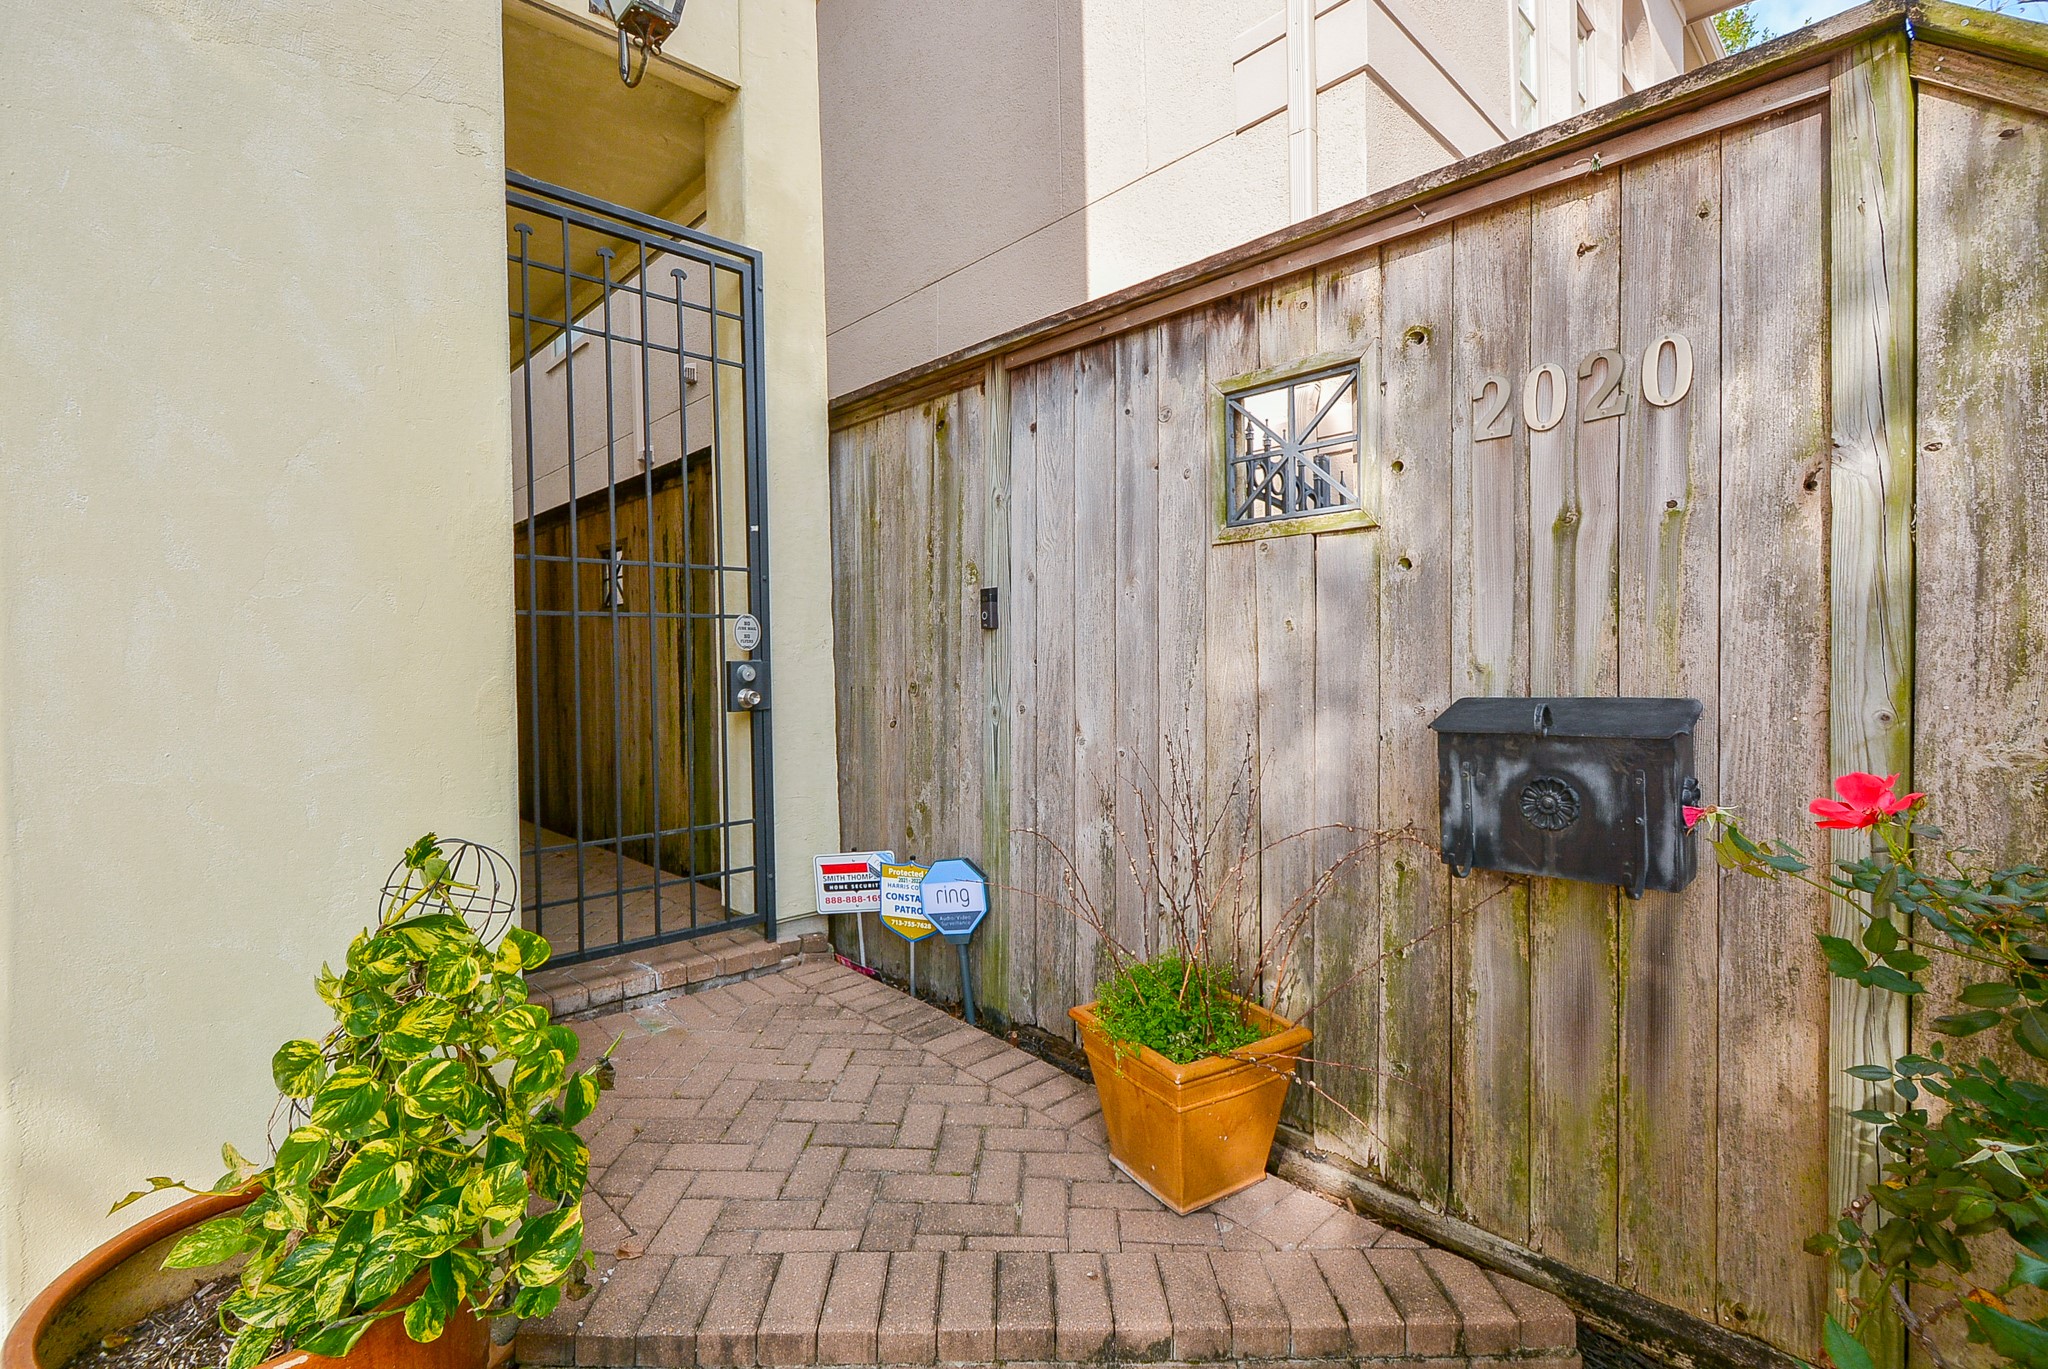 This is your private, gated entrance to the home, with artistic brick flooring. The home offers 3 bedrooms, 3-1/2 baths, and occupies a 3, 300 square-foot lot with 2,500 square-feet of incredible interior living space.